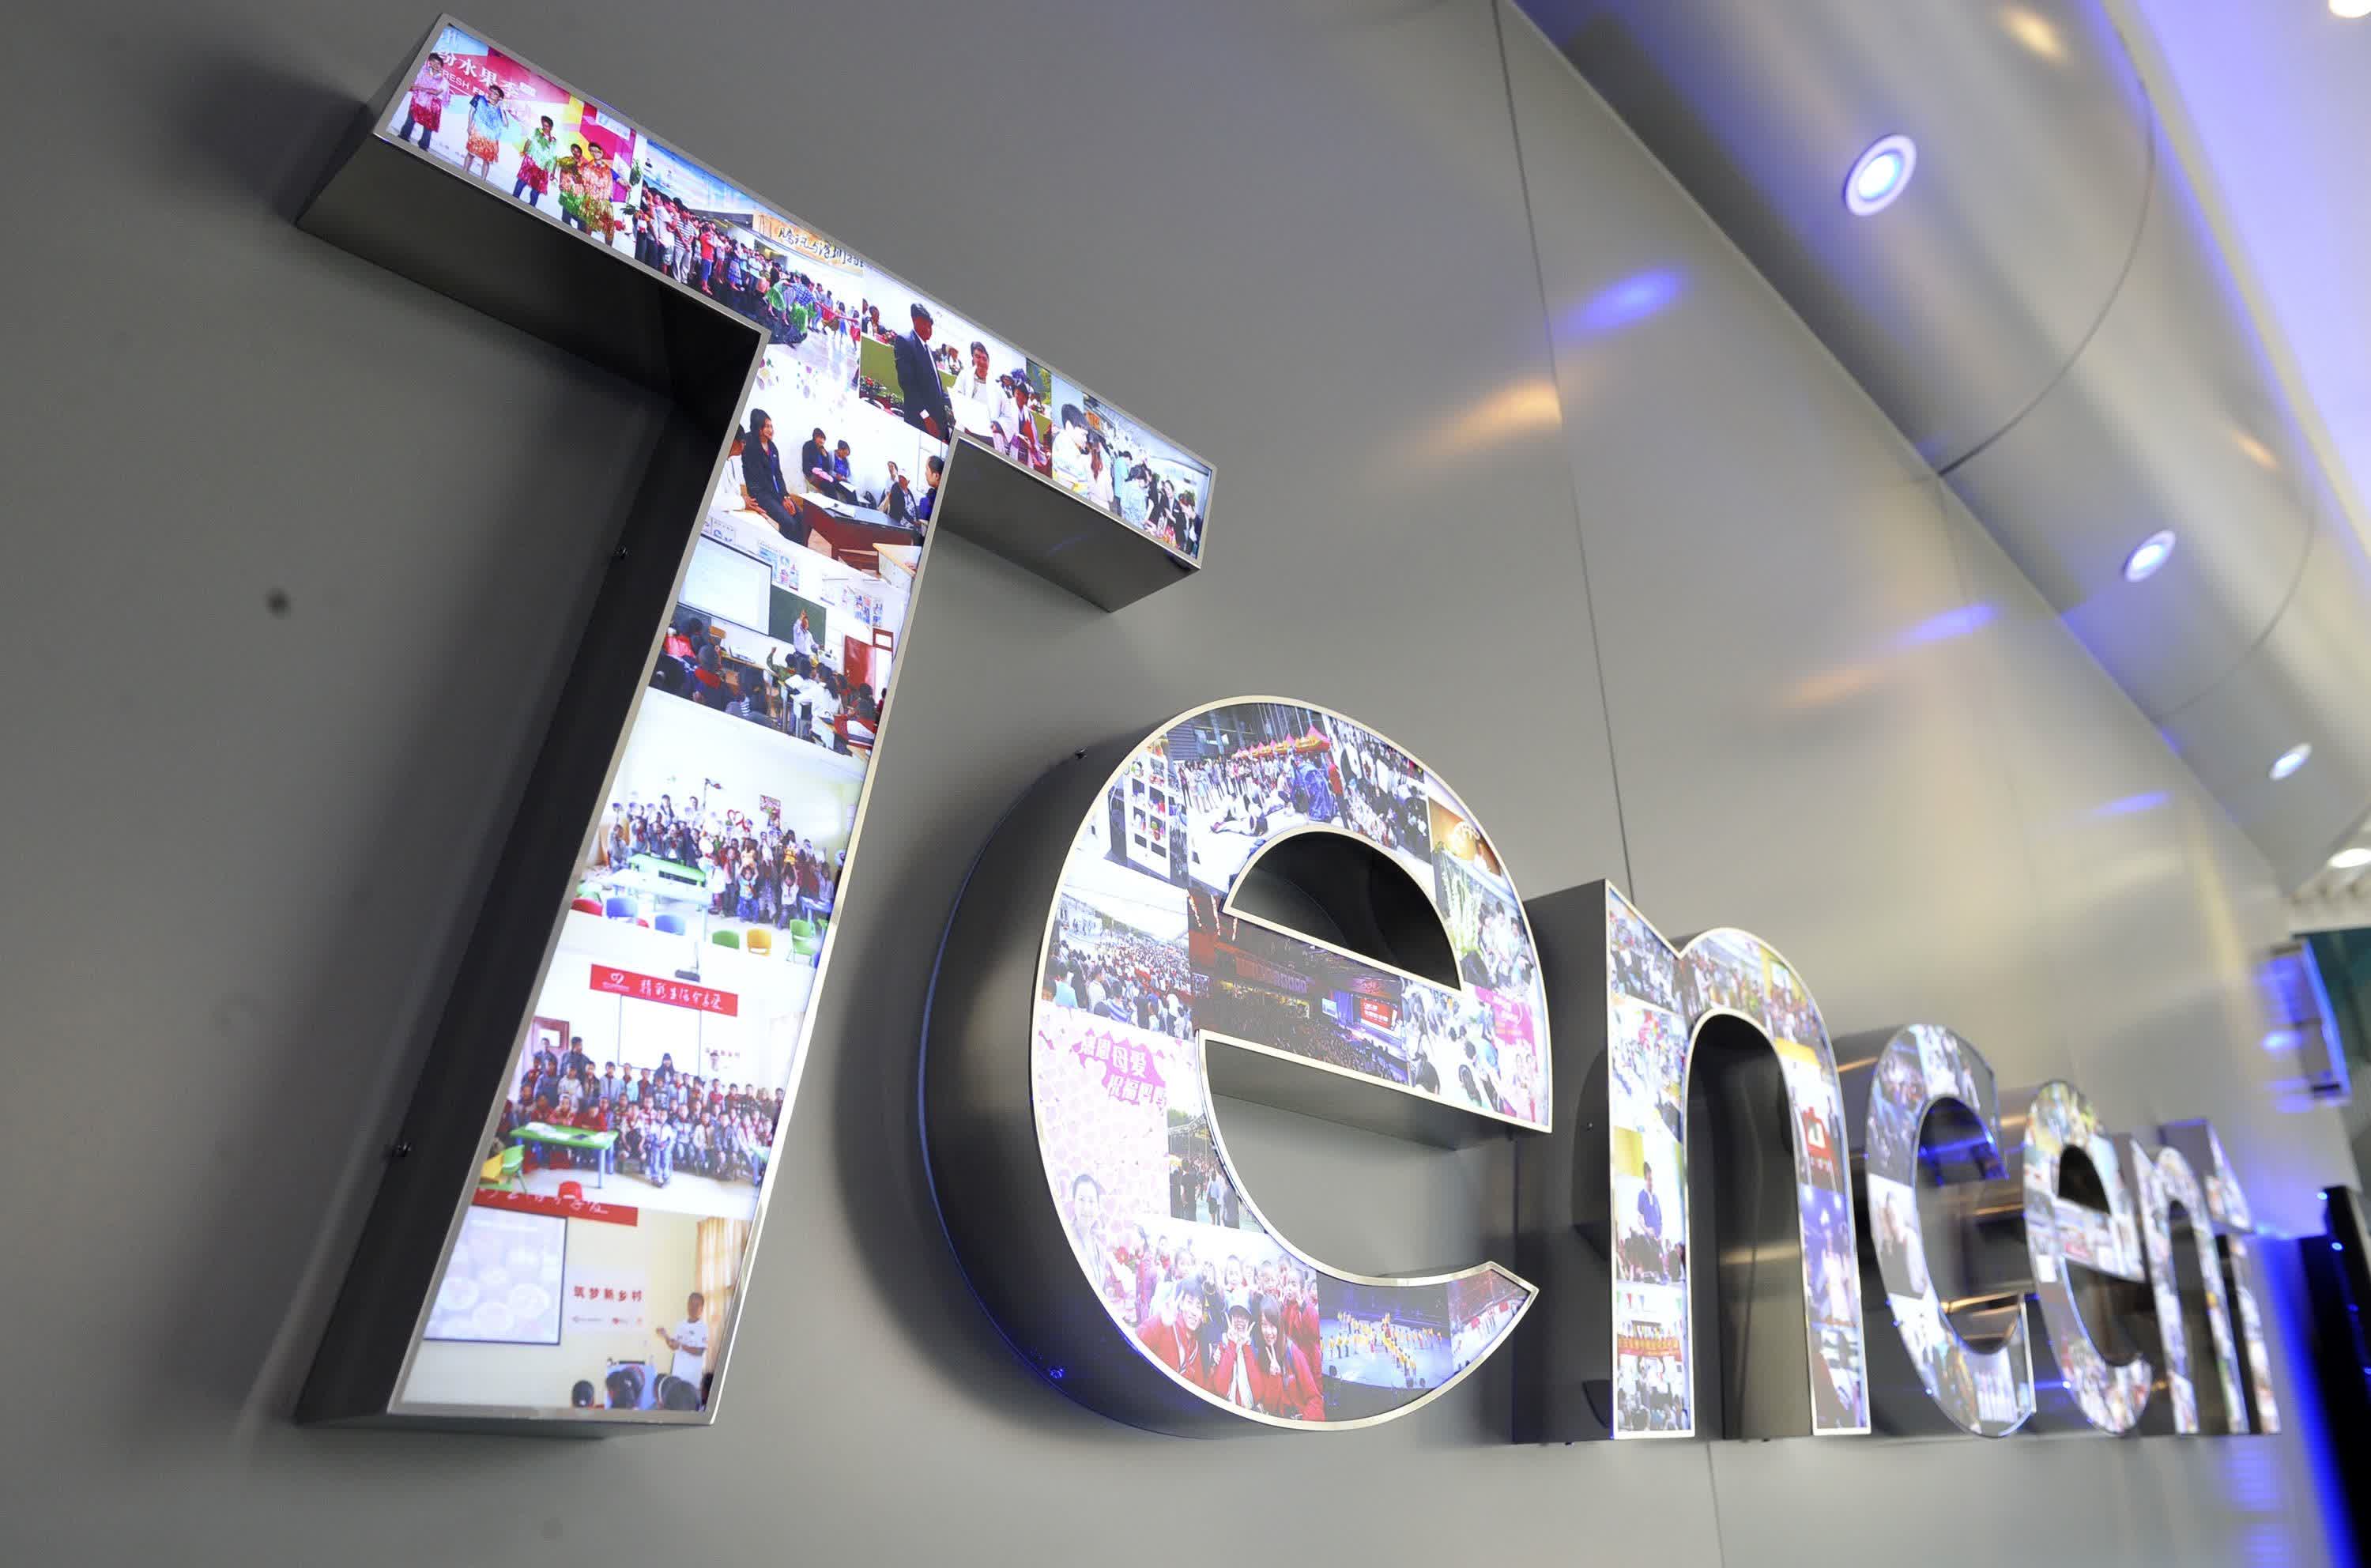 Heavy NFT regulations in China lead to Tencent closing its marketplace a year after launch